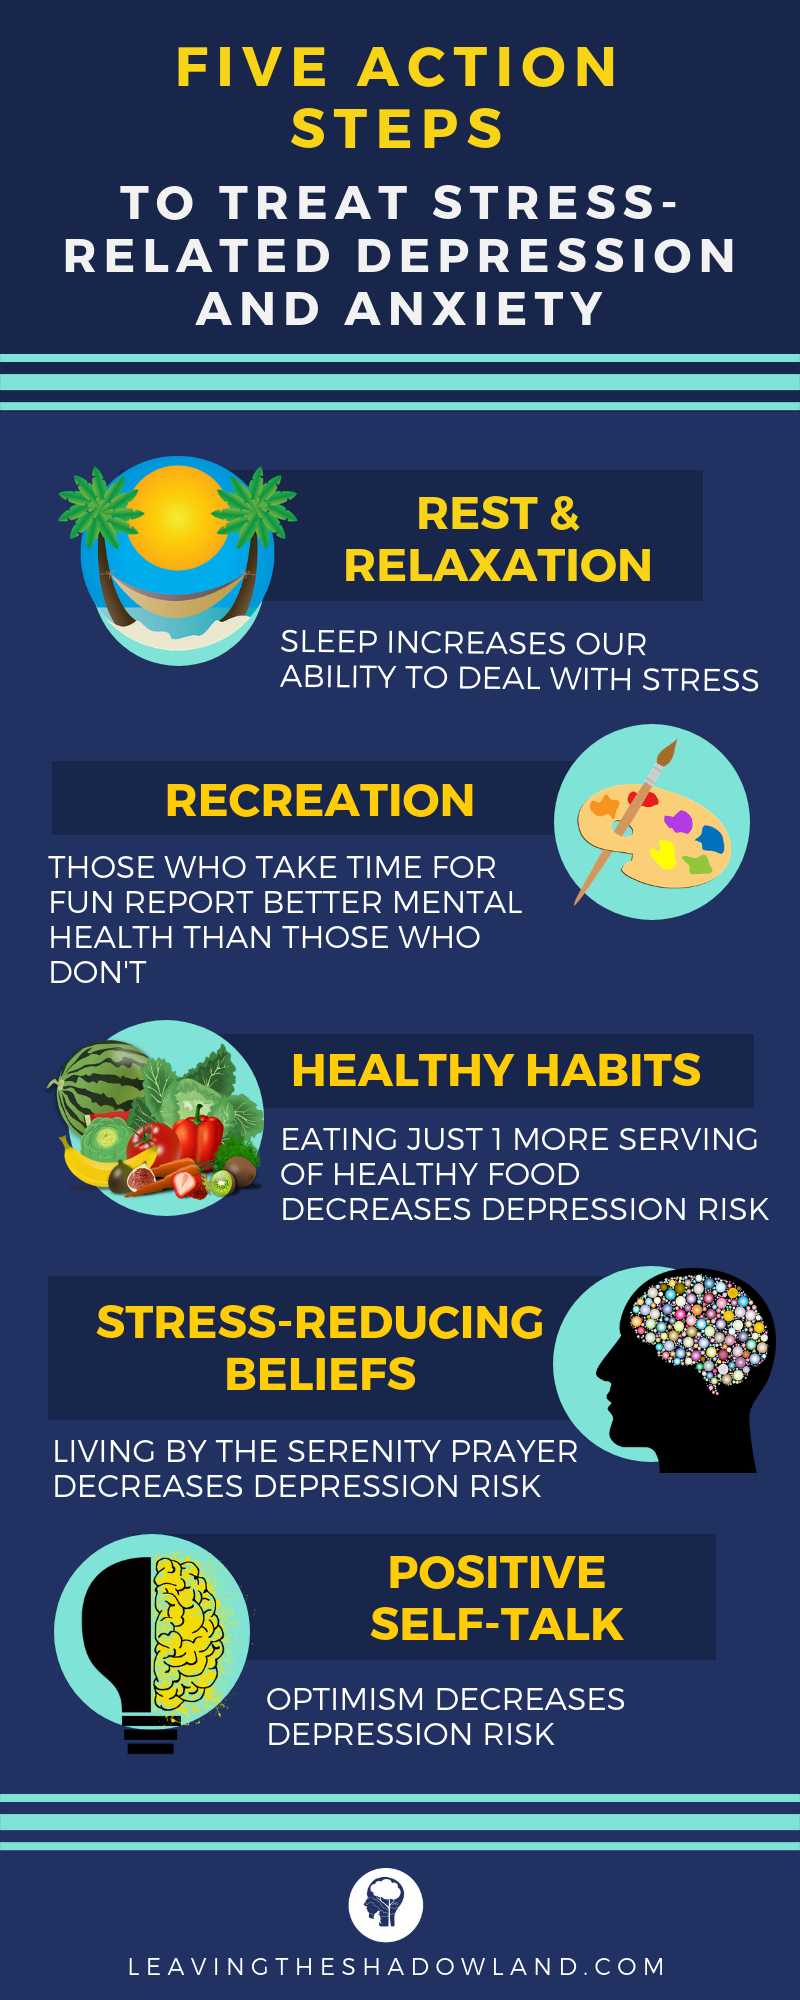 Five Action Steps to Reduce Stress, Depression, and Anxiety